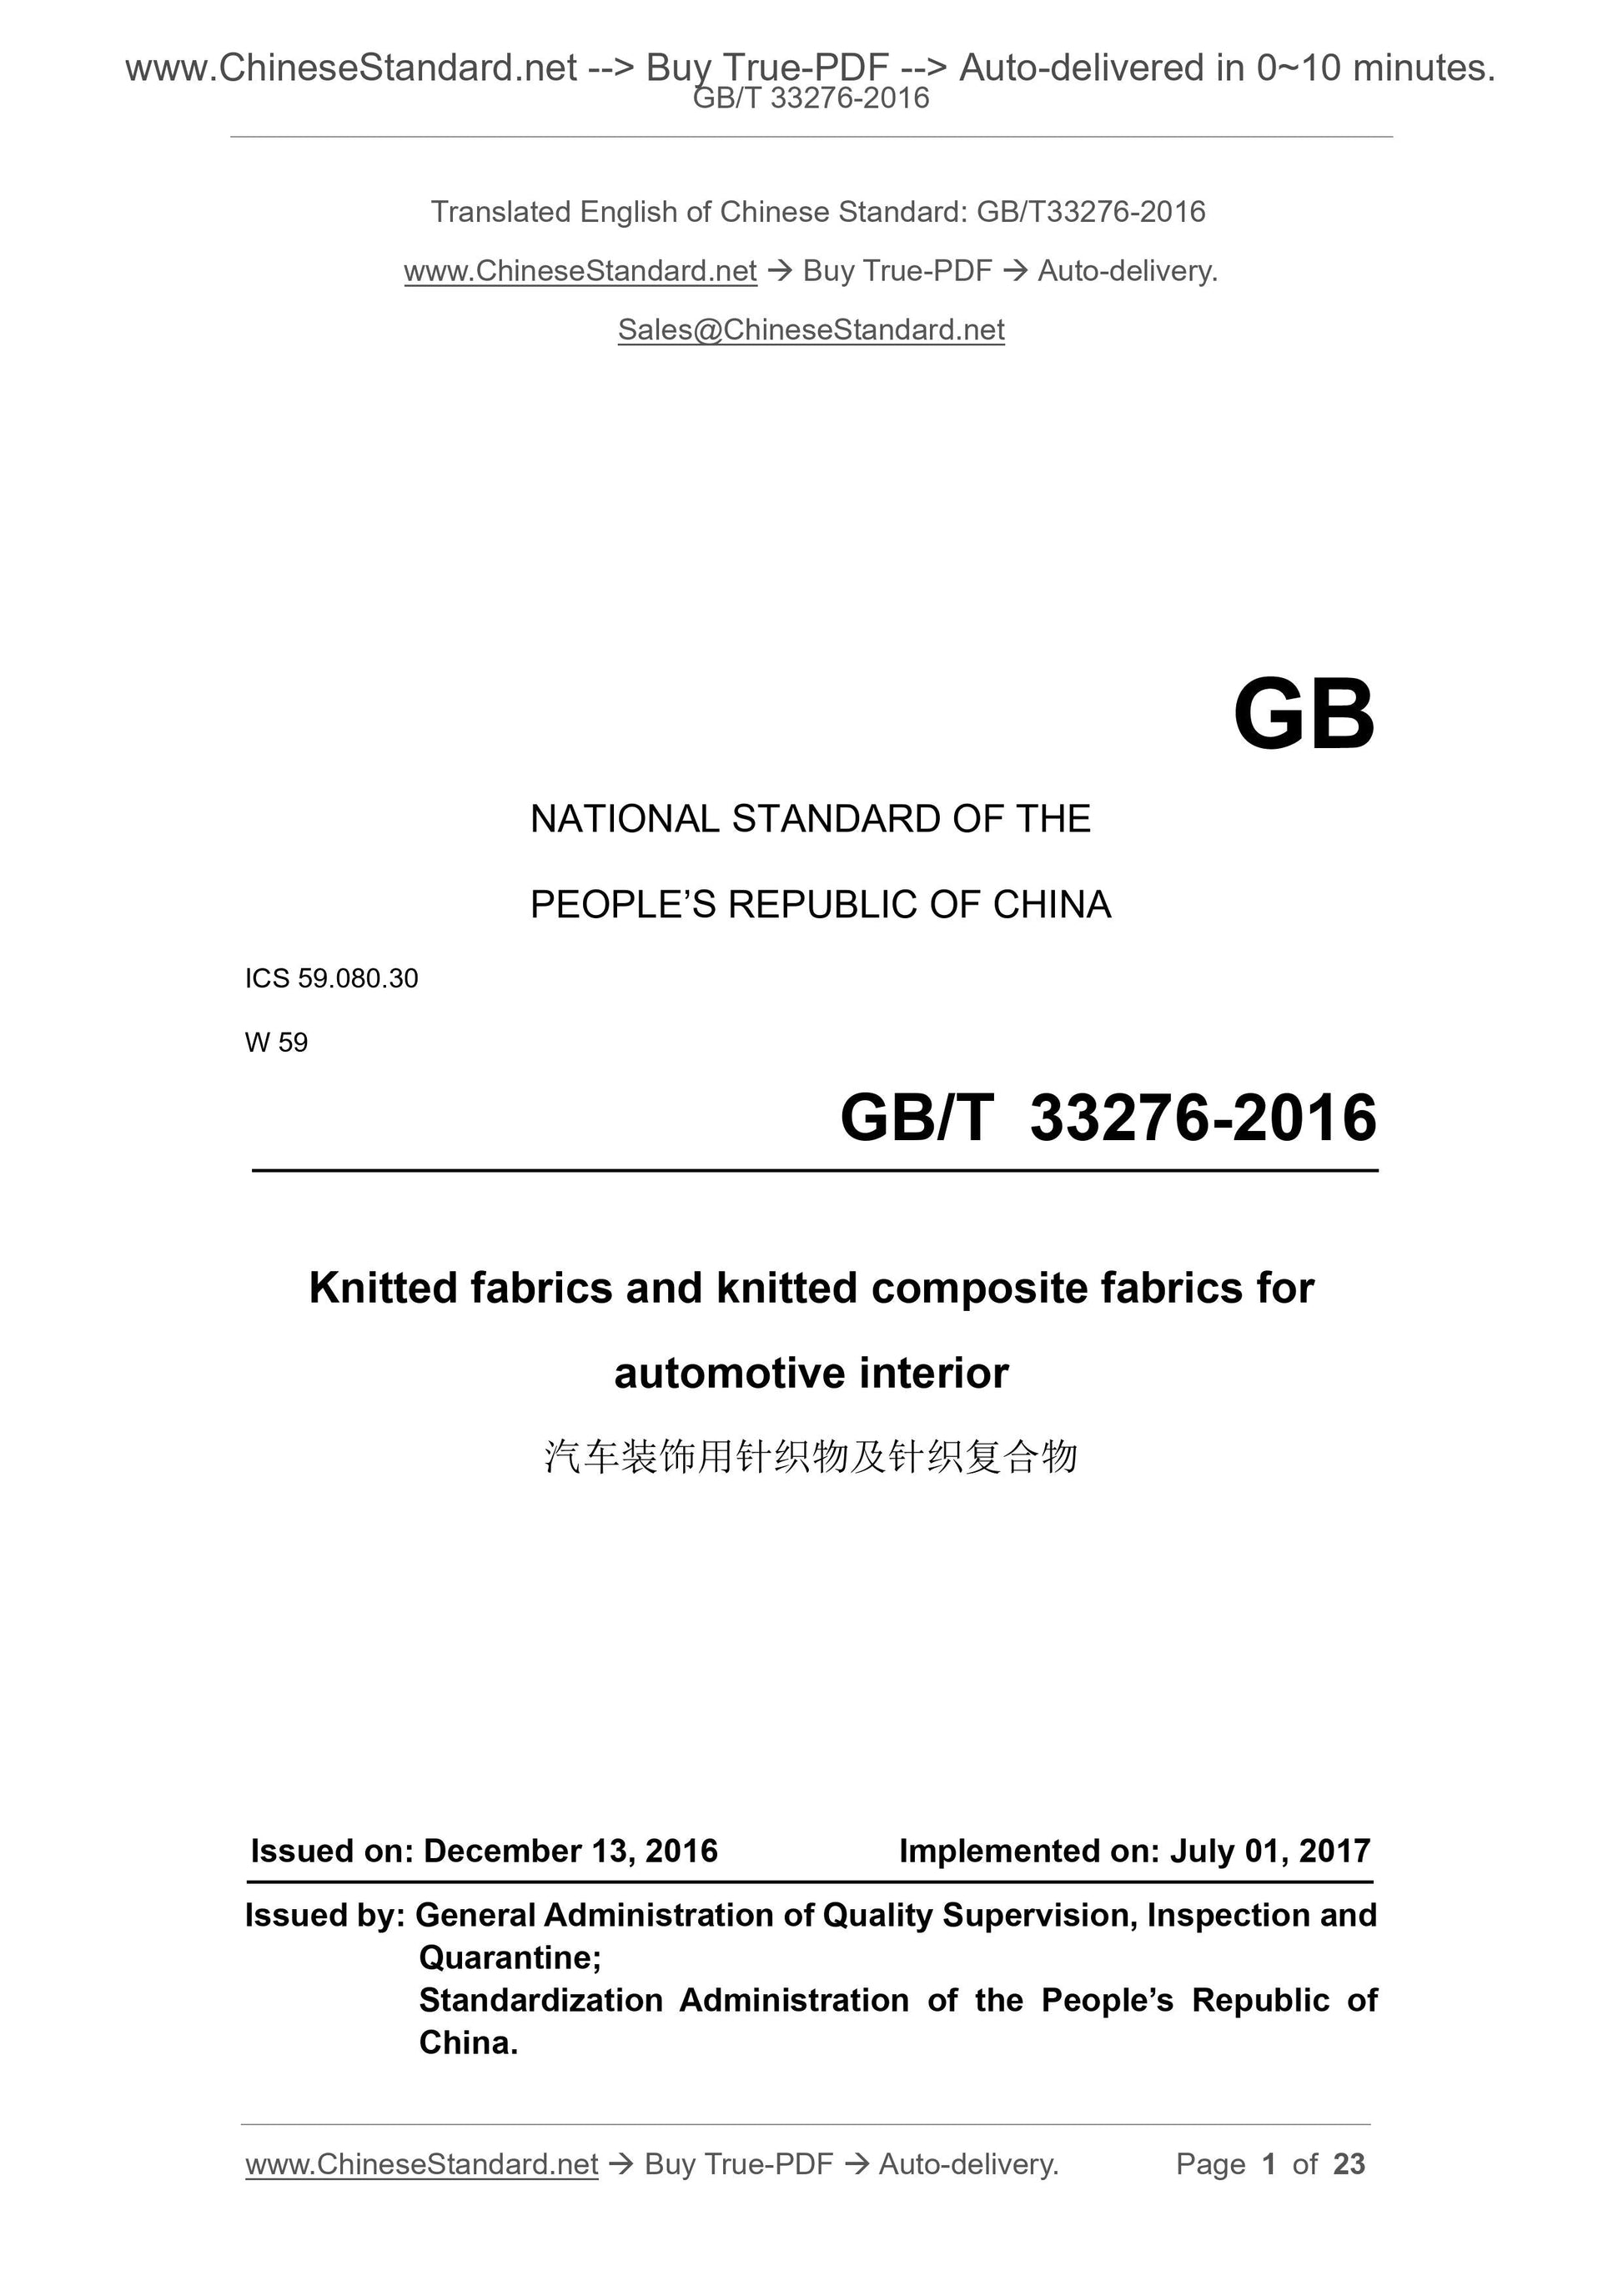 GB/T 33276-2016 Page 1